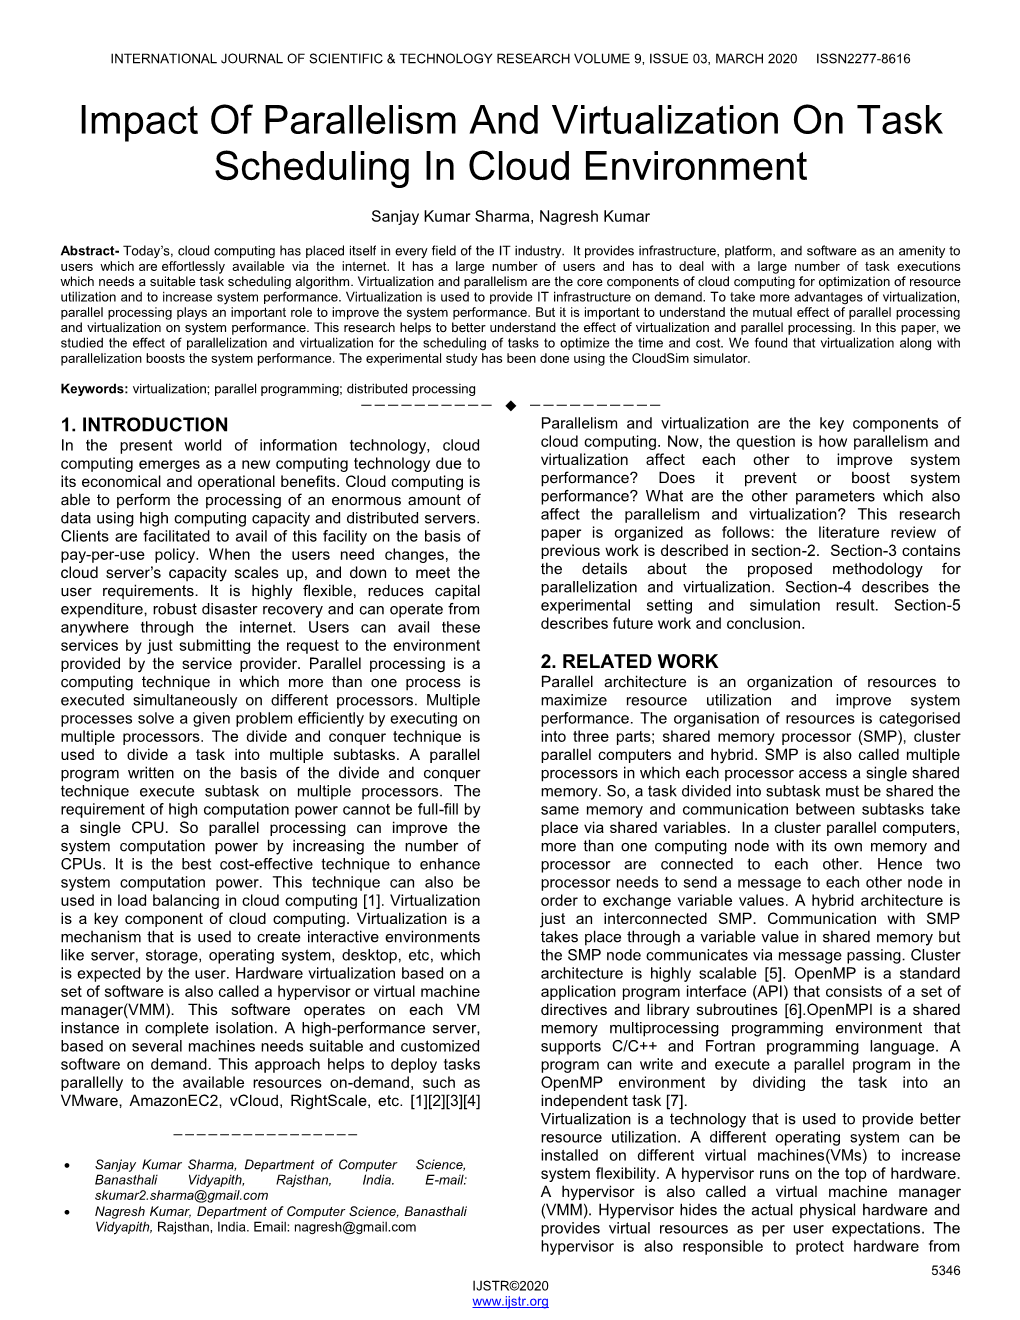 Impact of Parallelism and Virtualization on Task Scheduling in Cloud Environment